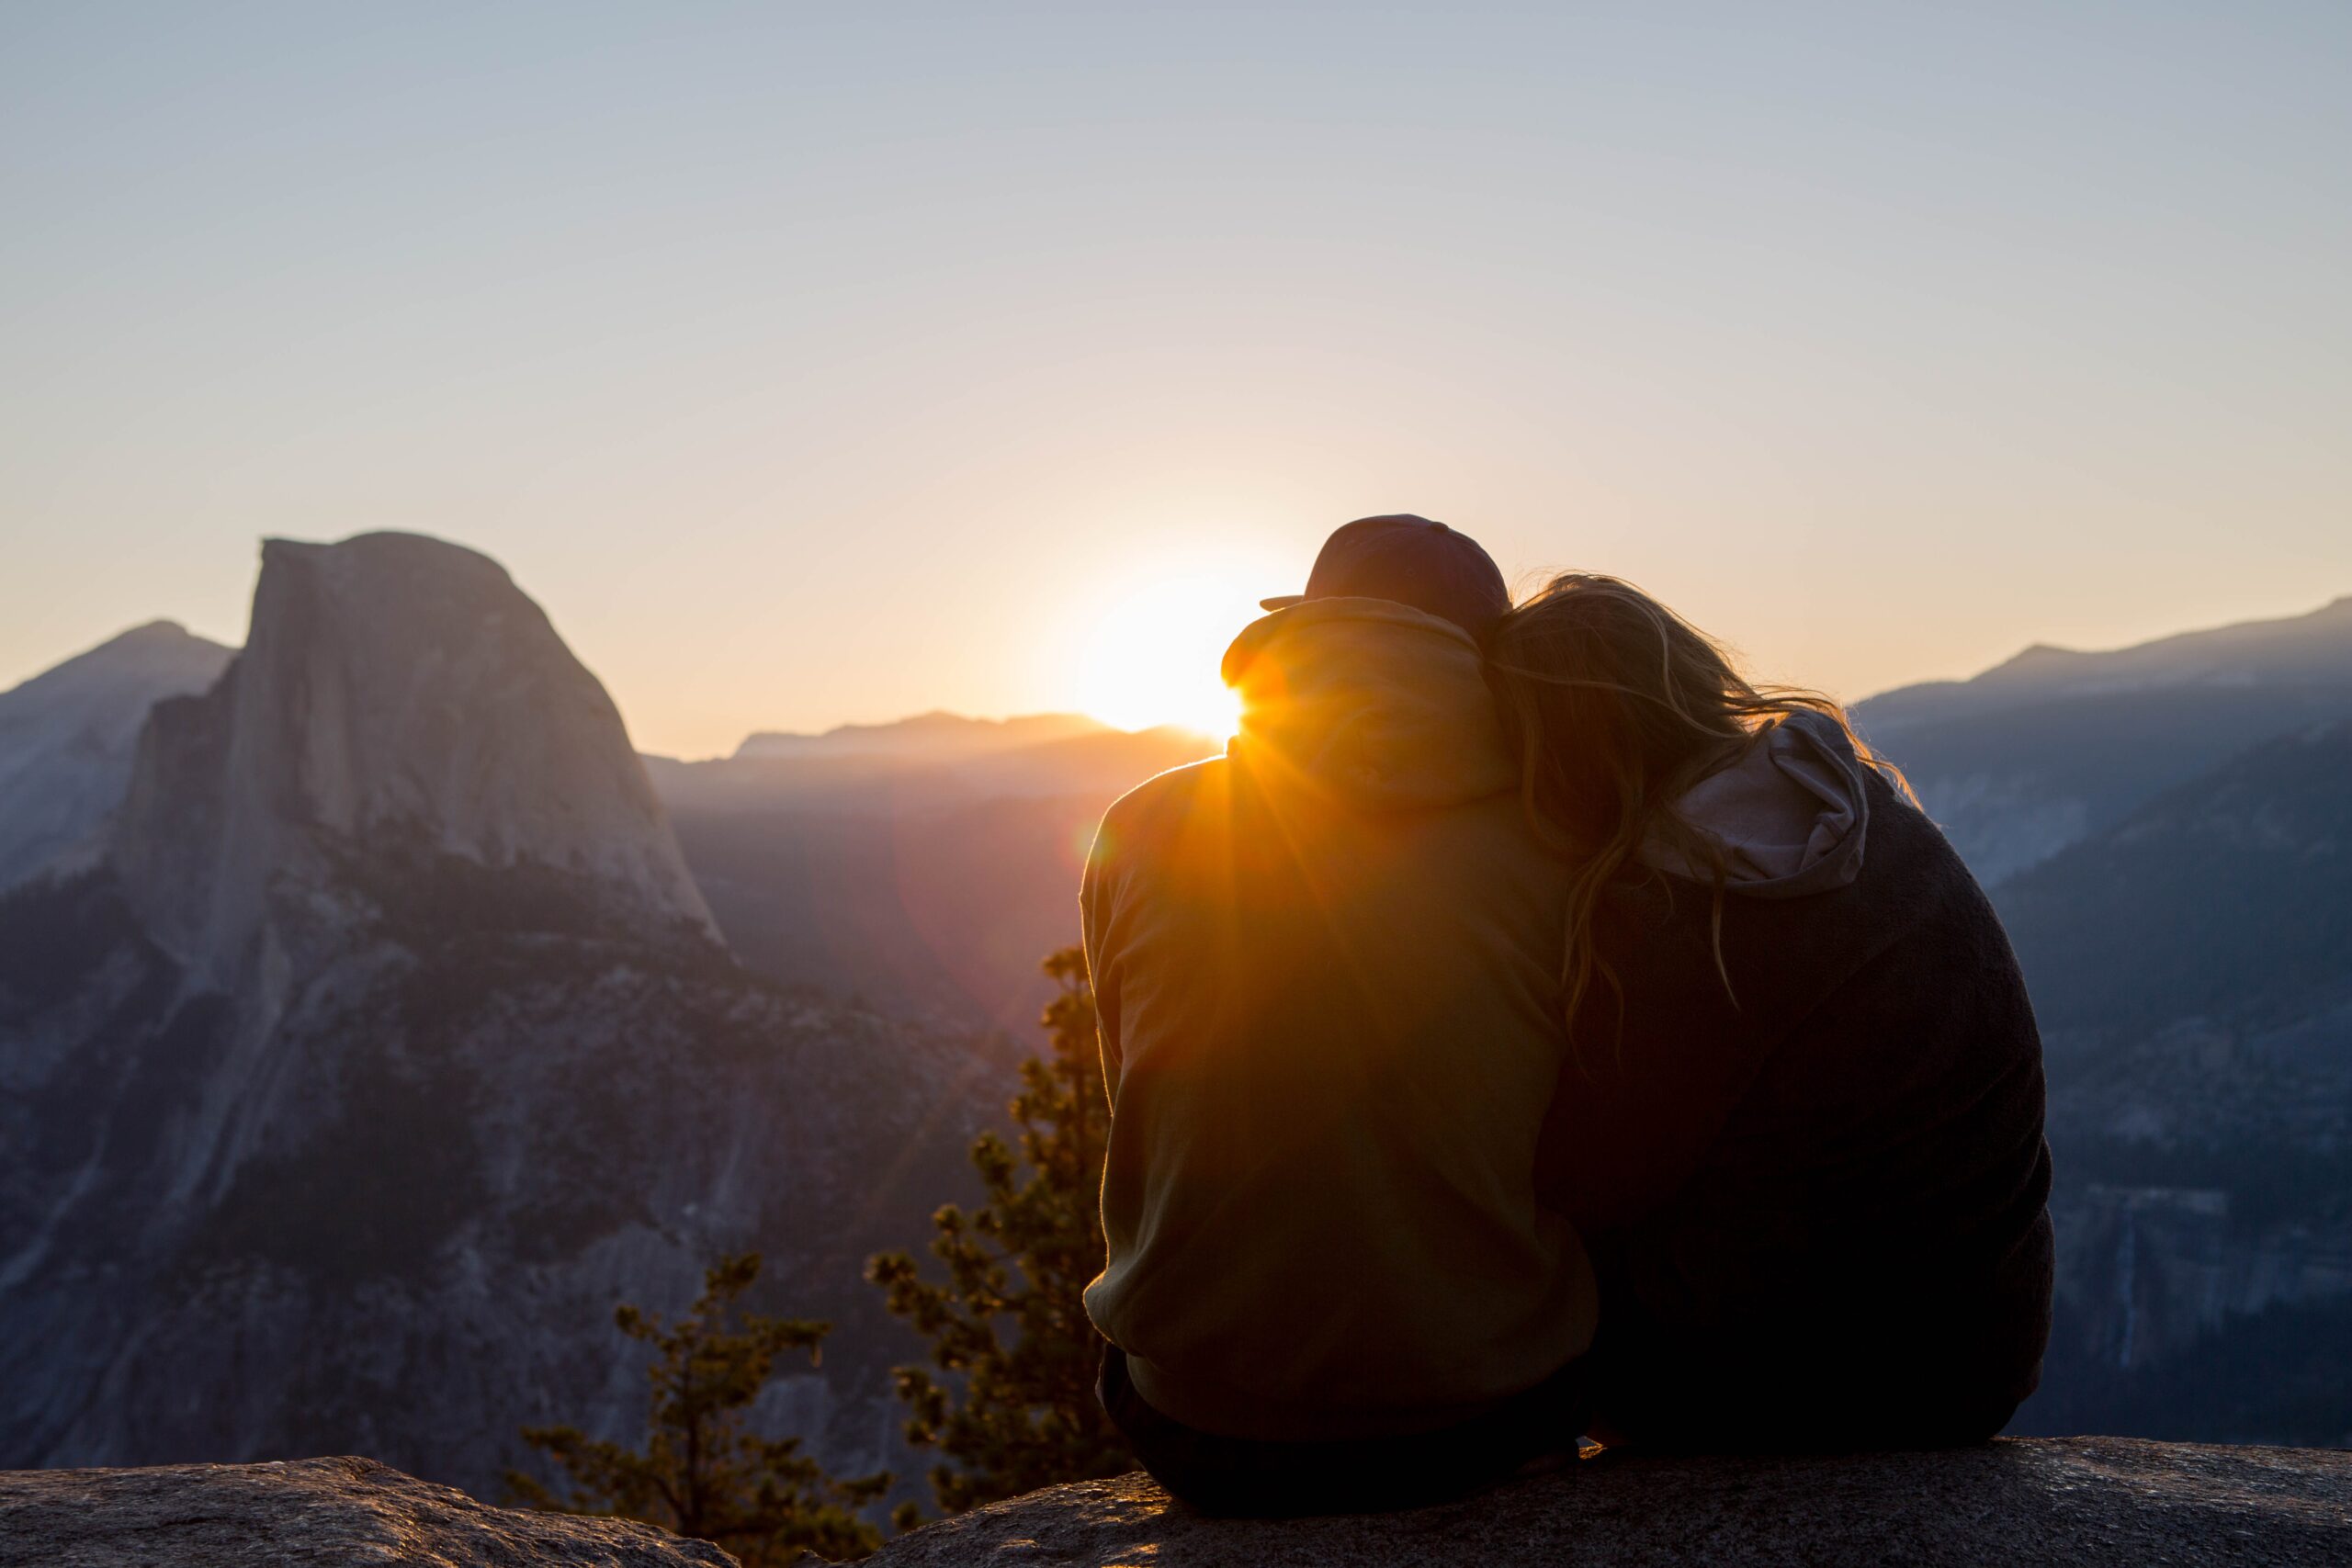 Couple on a date watching the sunset in Yosemite Valley